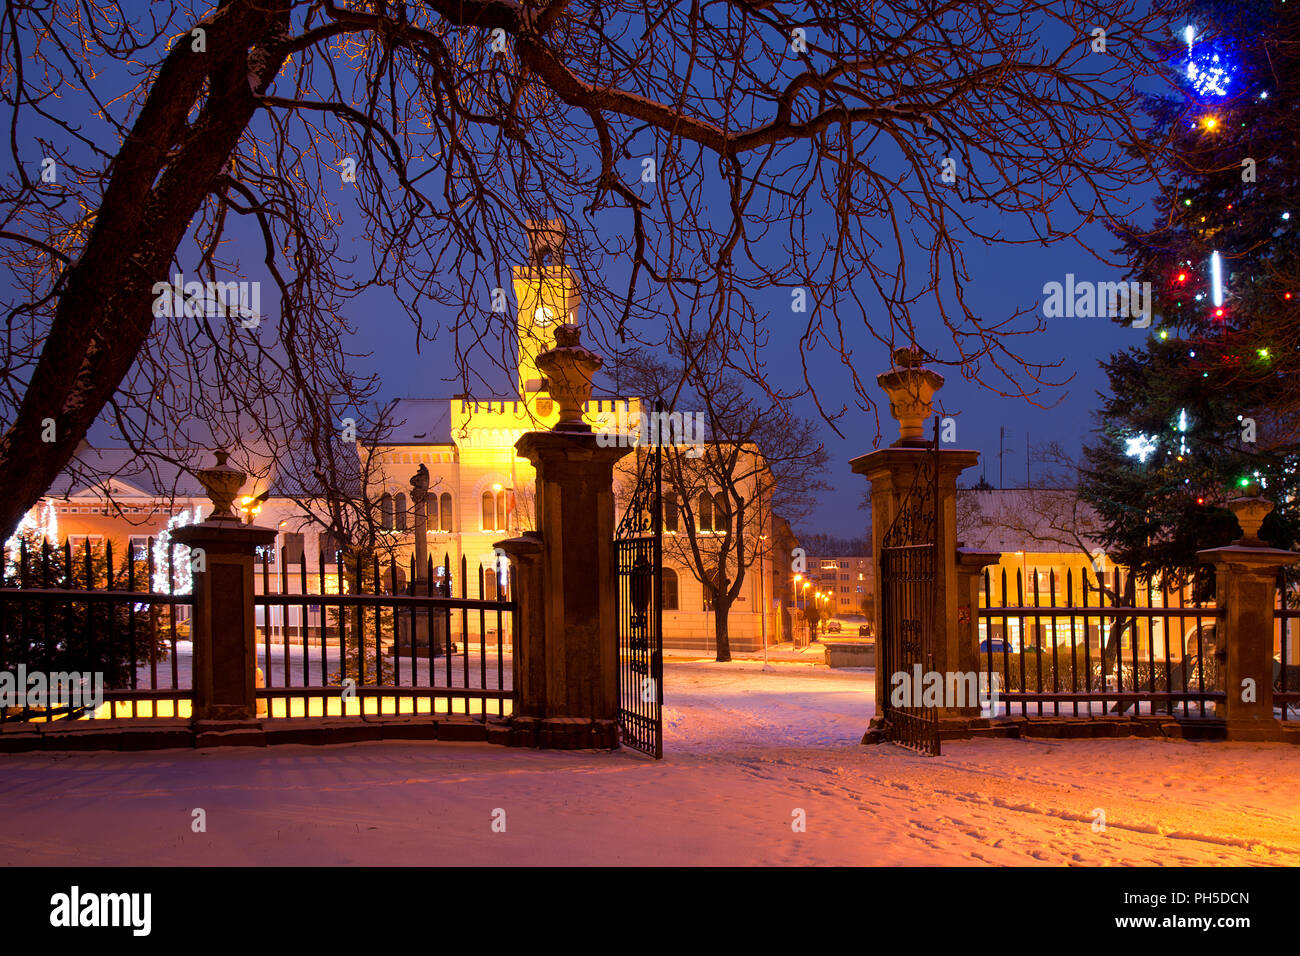 A town in the Christmastime. Stock Photo